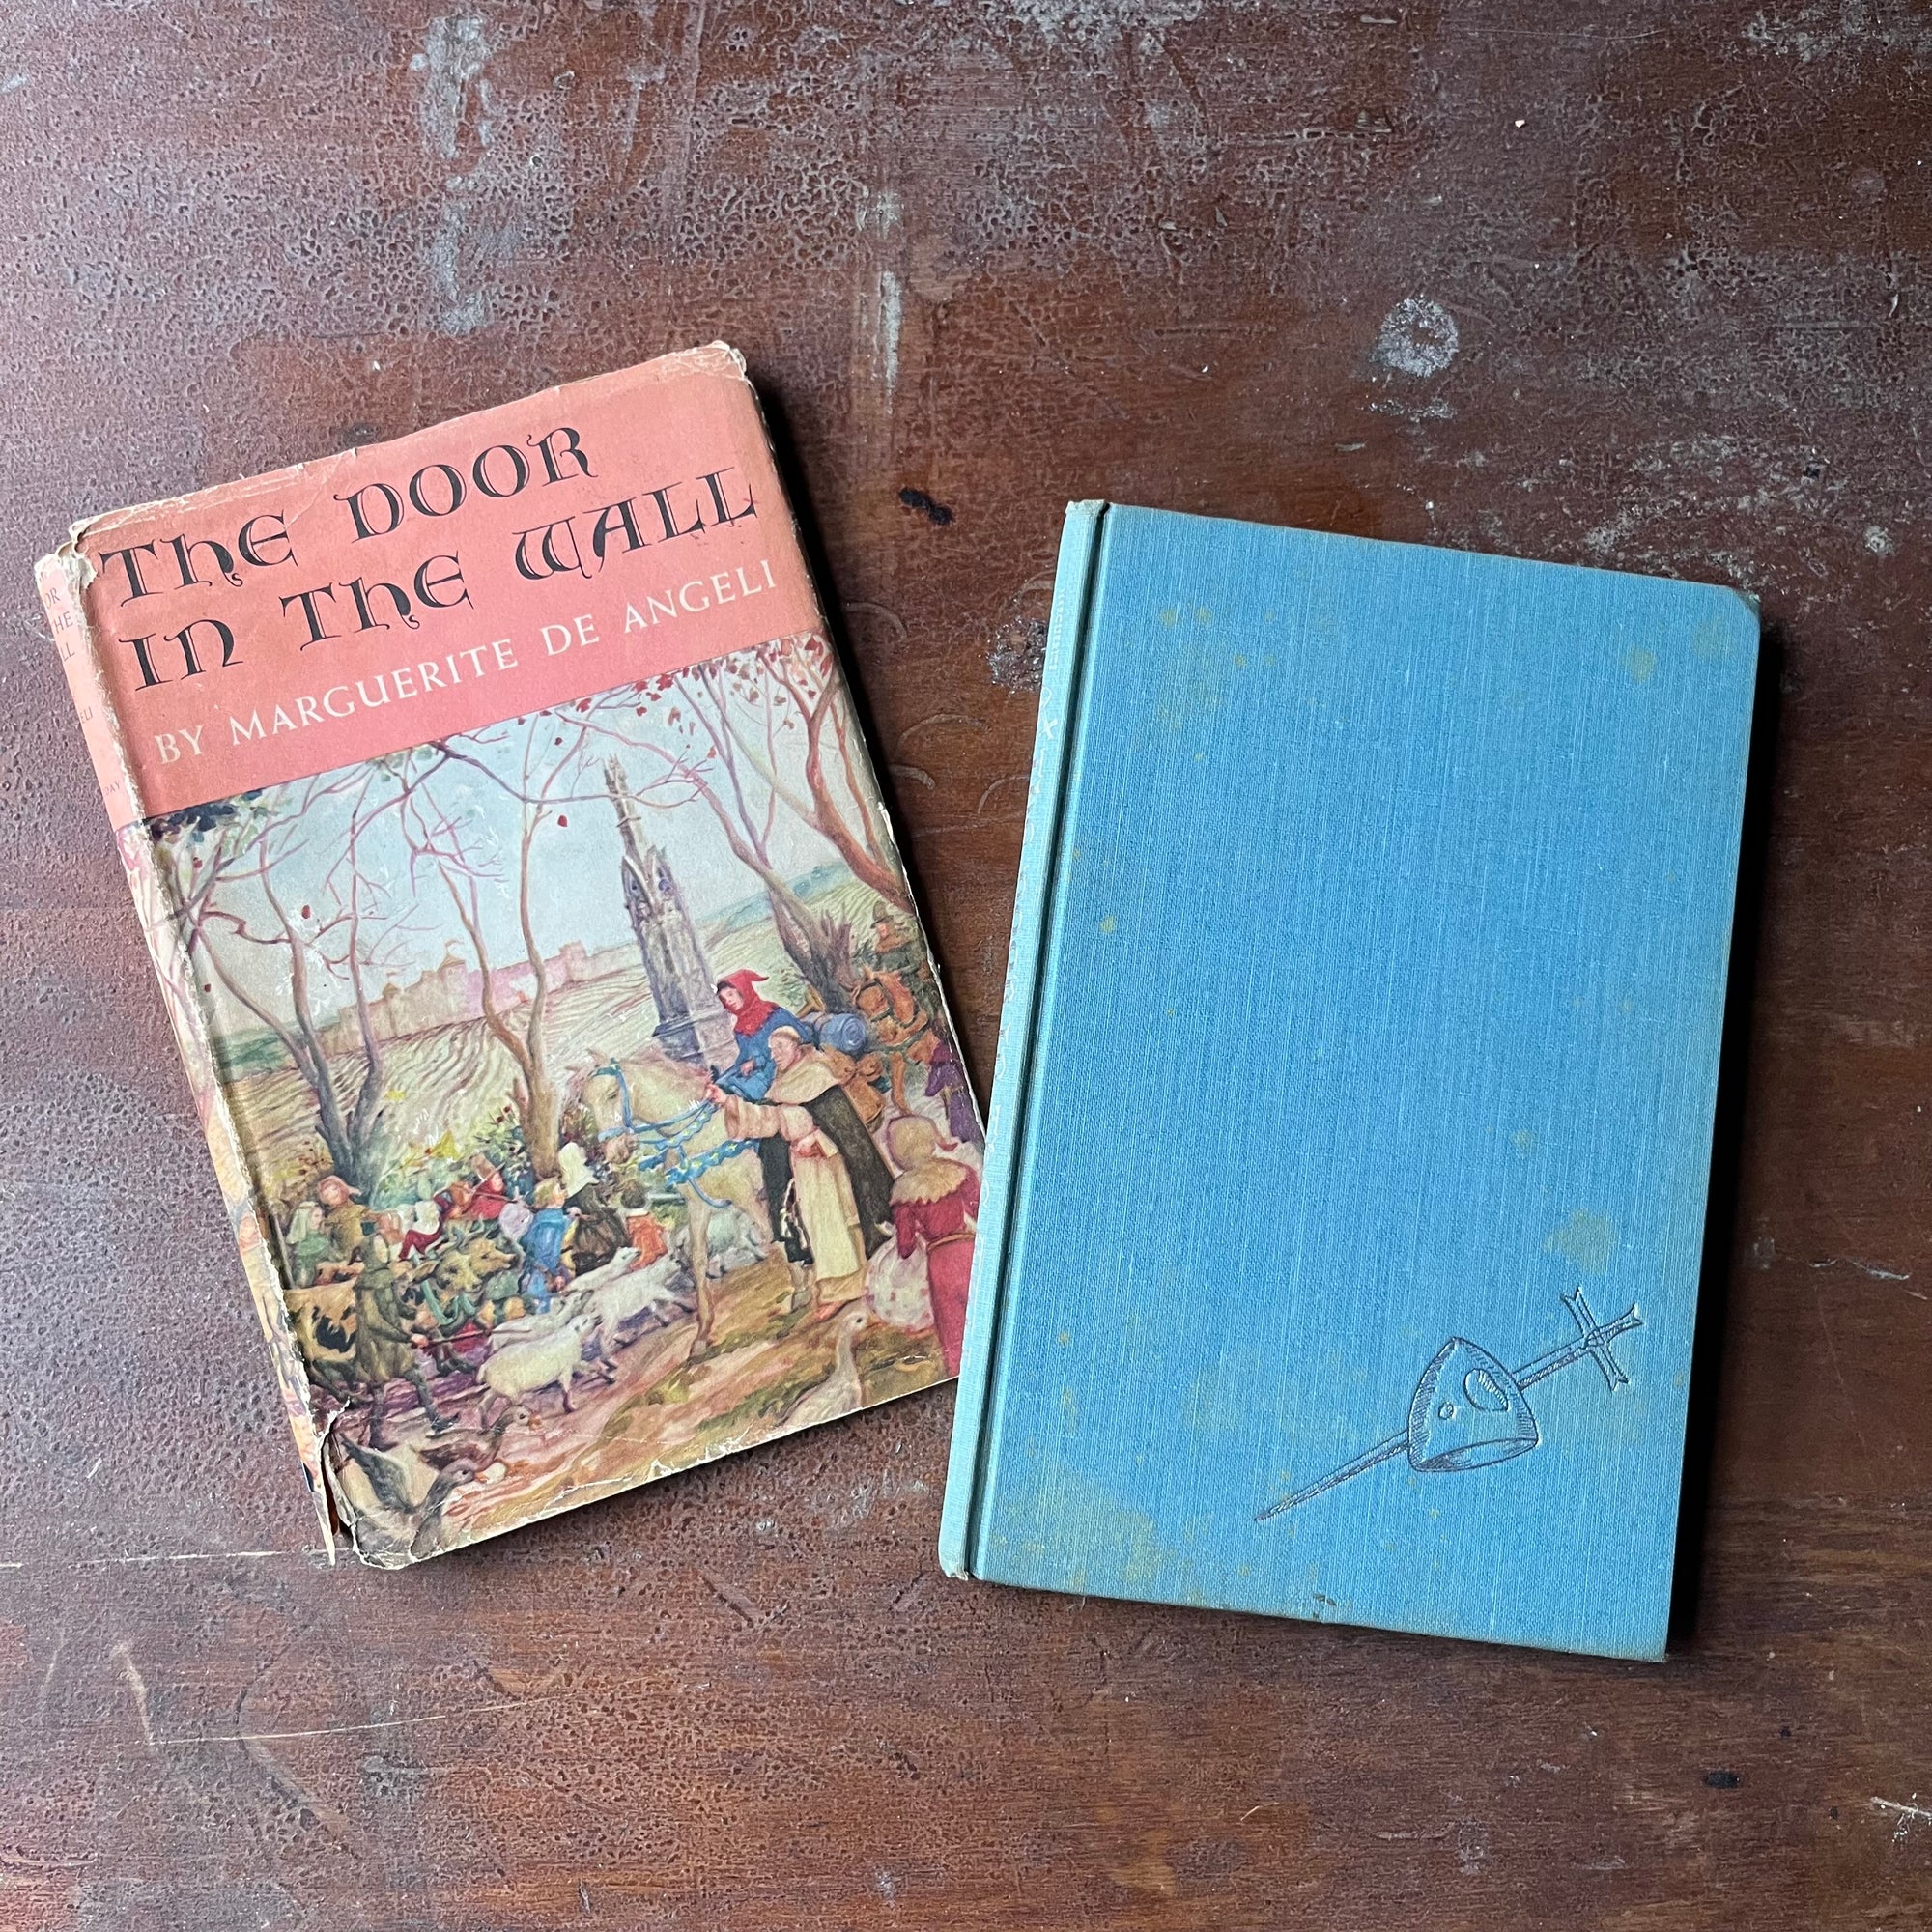 The Door in the Wall by Margeurite de Angeli-1949 Stated First Edition with Dust Jacket-vintage John C. Newbery Medal Winner - view of the dust jacket's front cover along with the book's front cover - the book is blue with an embossed sword stuck through what I think is a helmet? on the bottom right hand corner